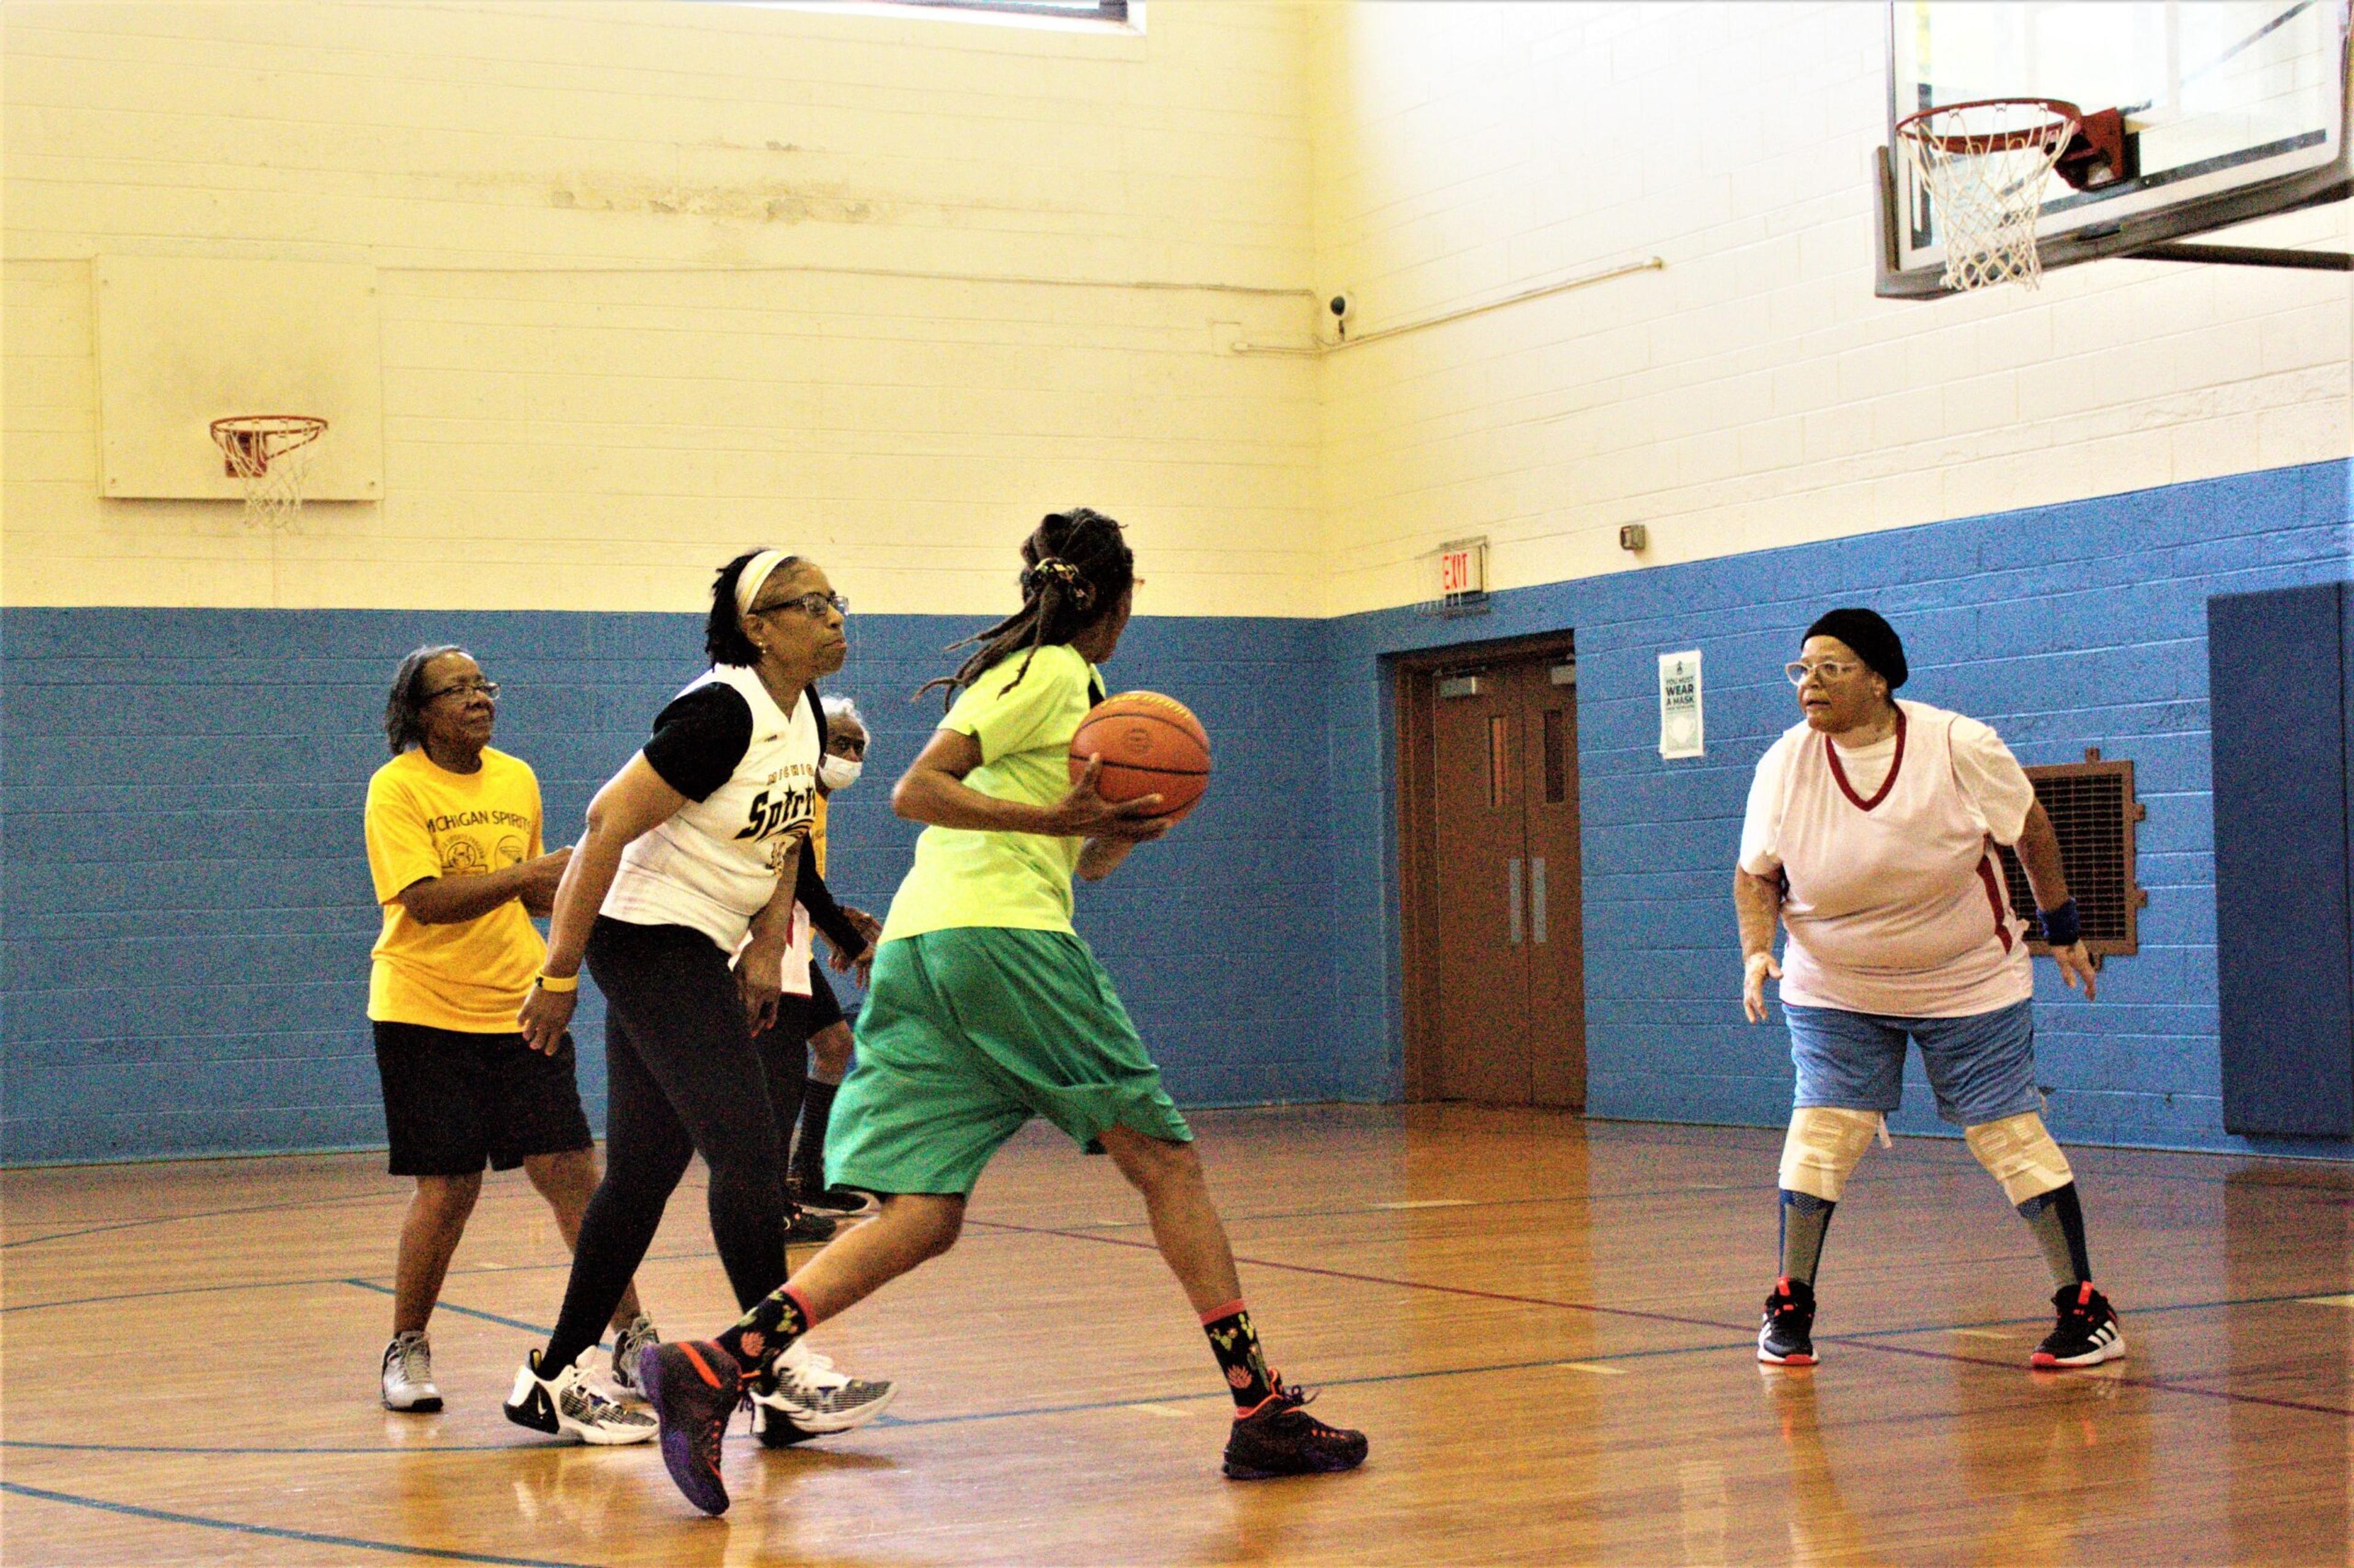 The Michigan Spirits senior women's basketball team practices at the Lasky Recreation Center in Detroit.